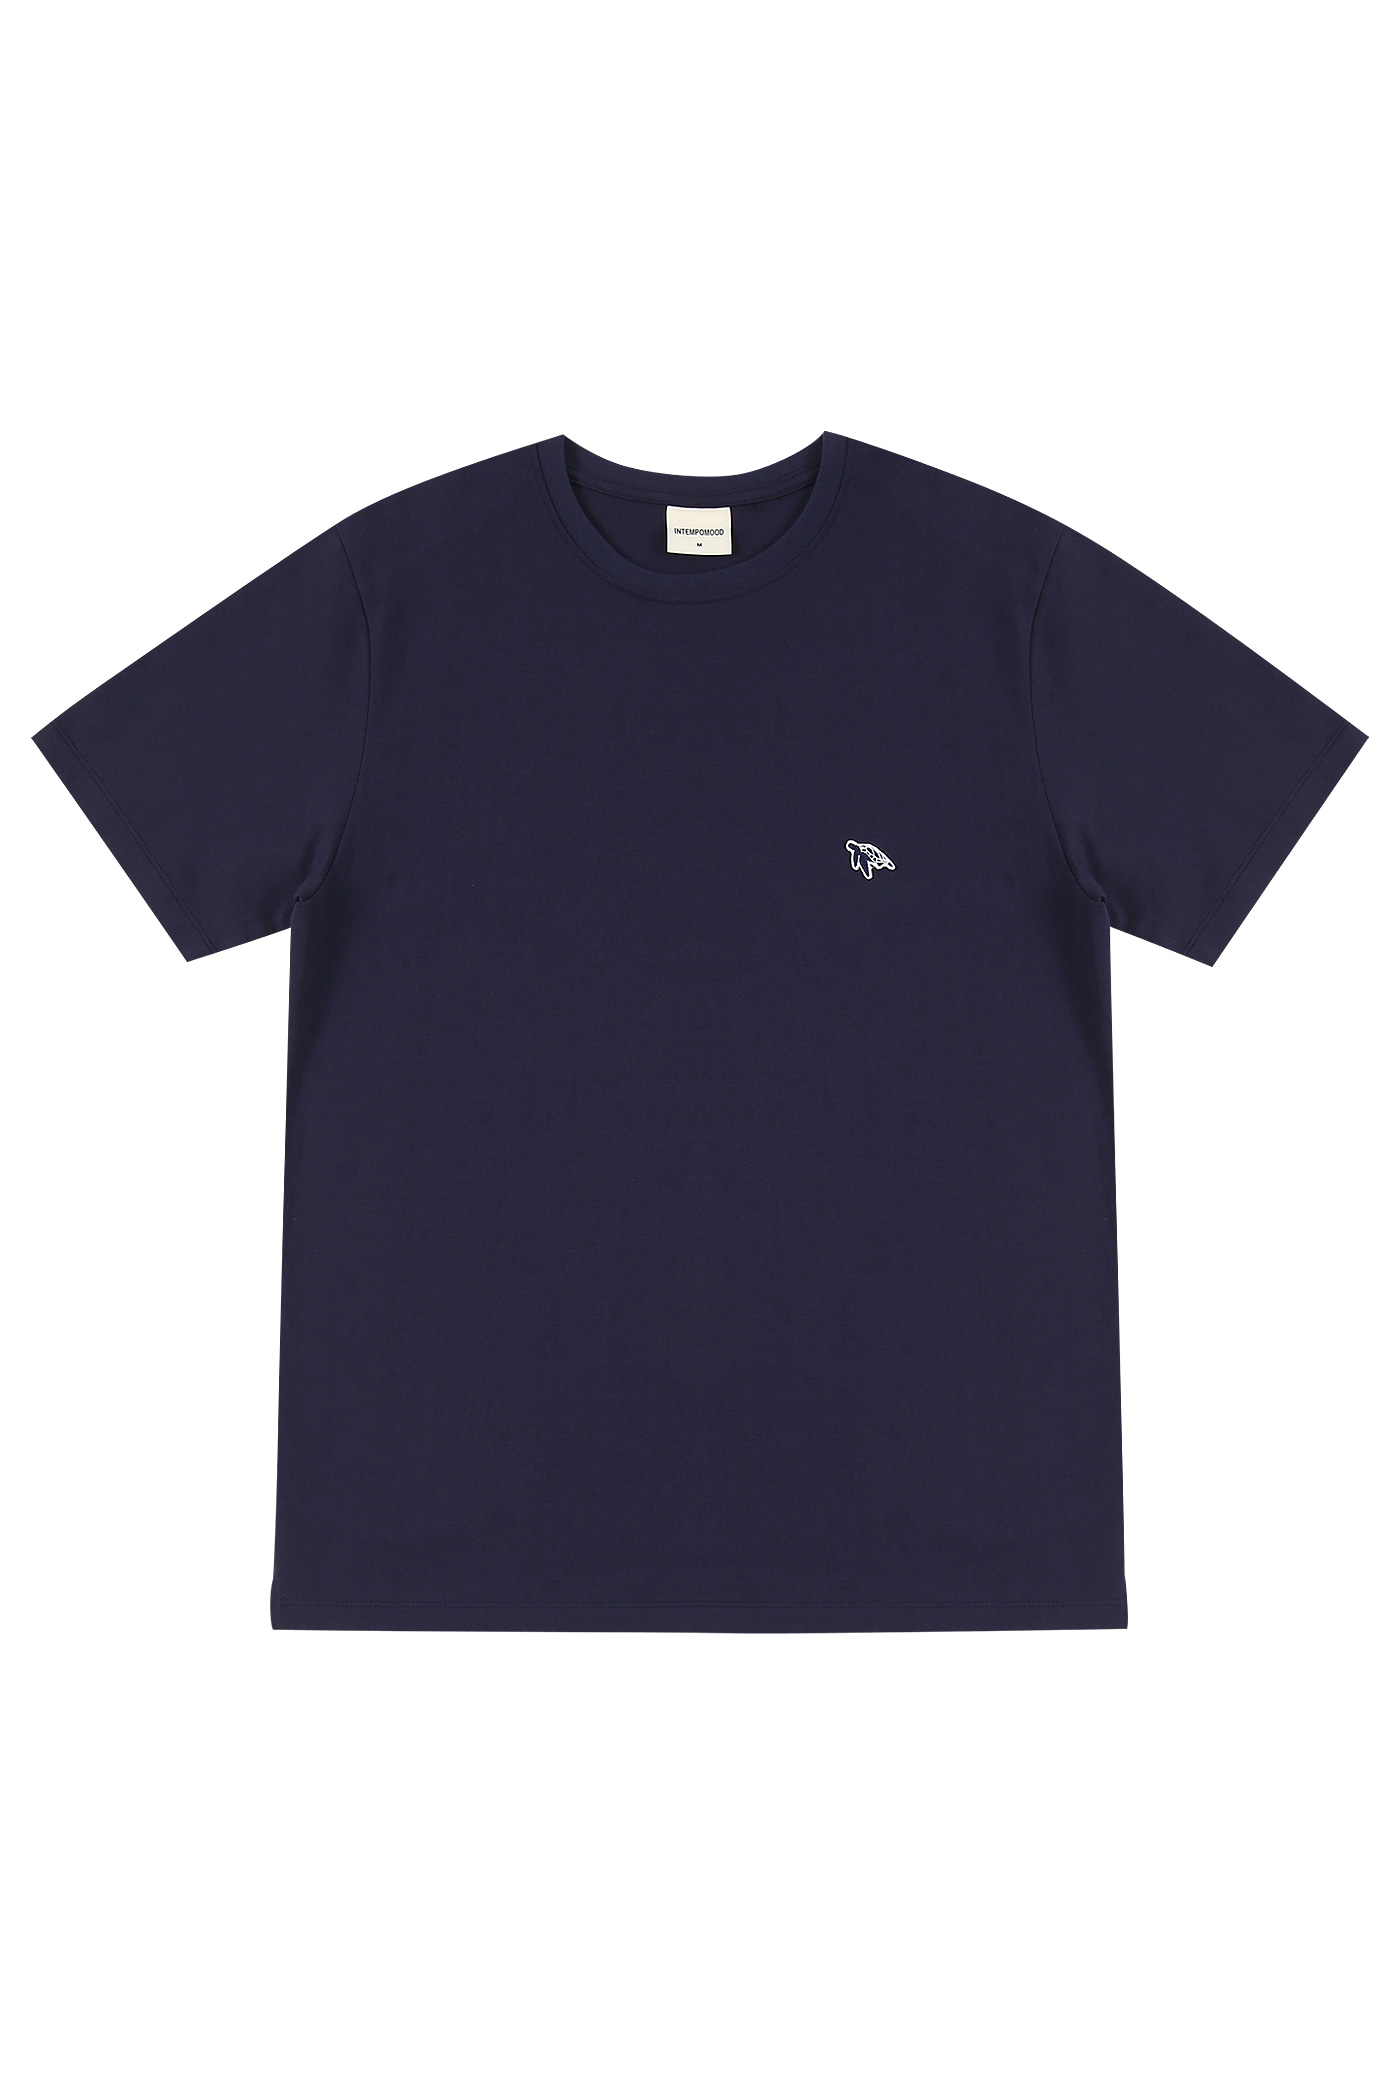 Turtle Patches T-shirt_Midnight blue